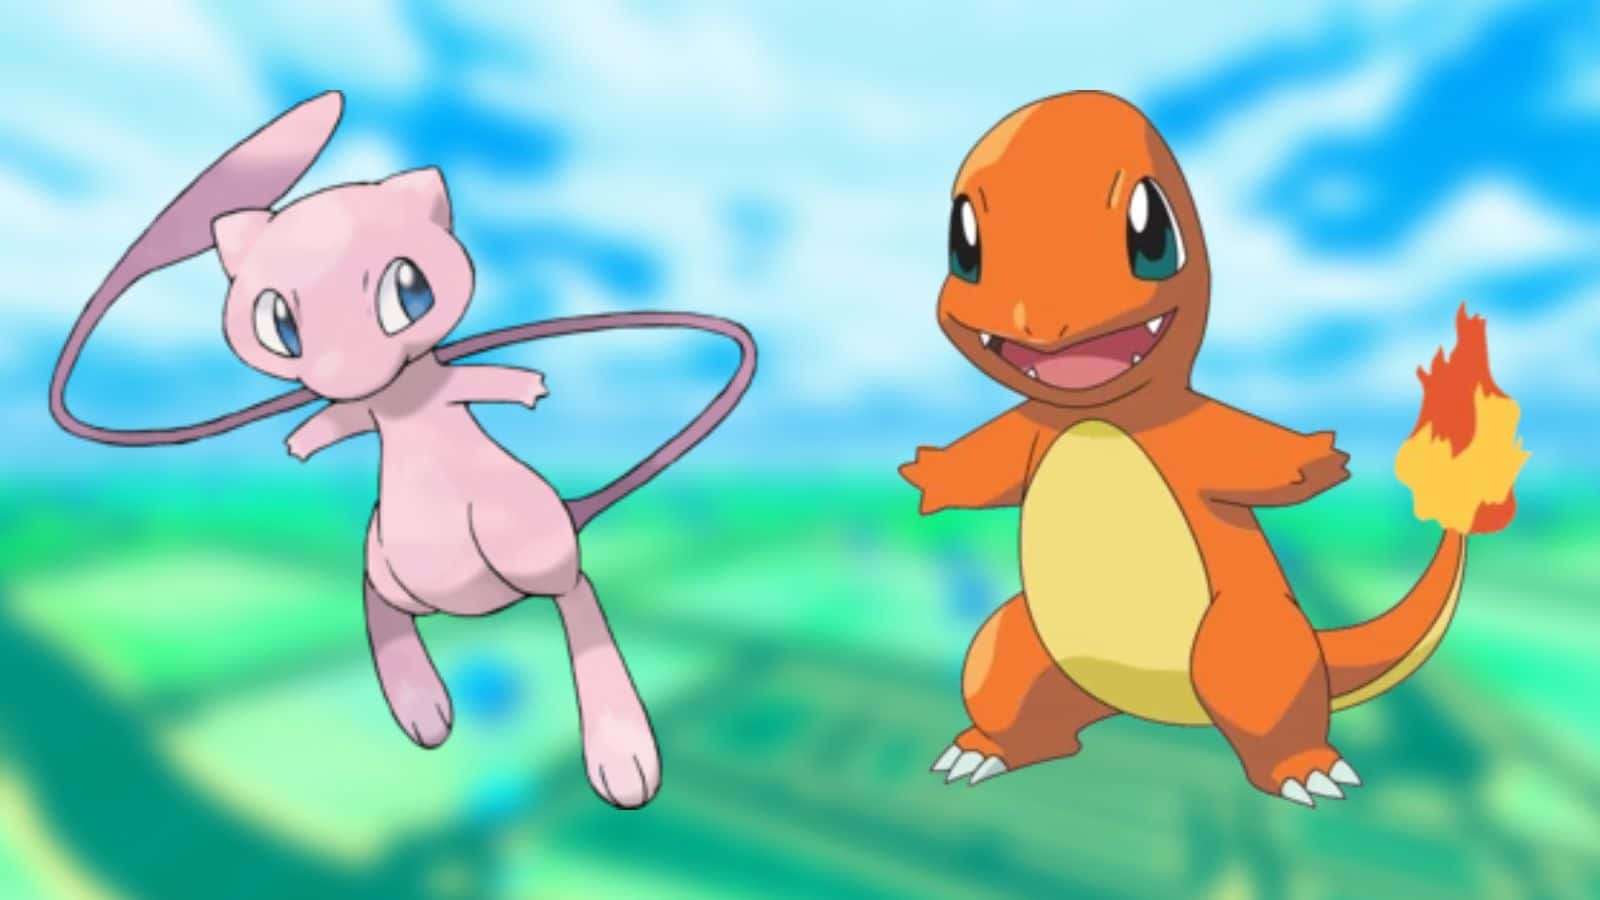 Mew and Charmander in front of a Pokemon background